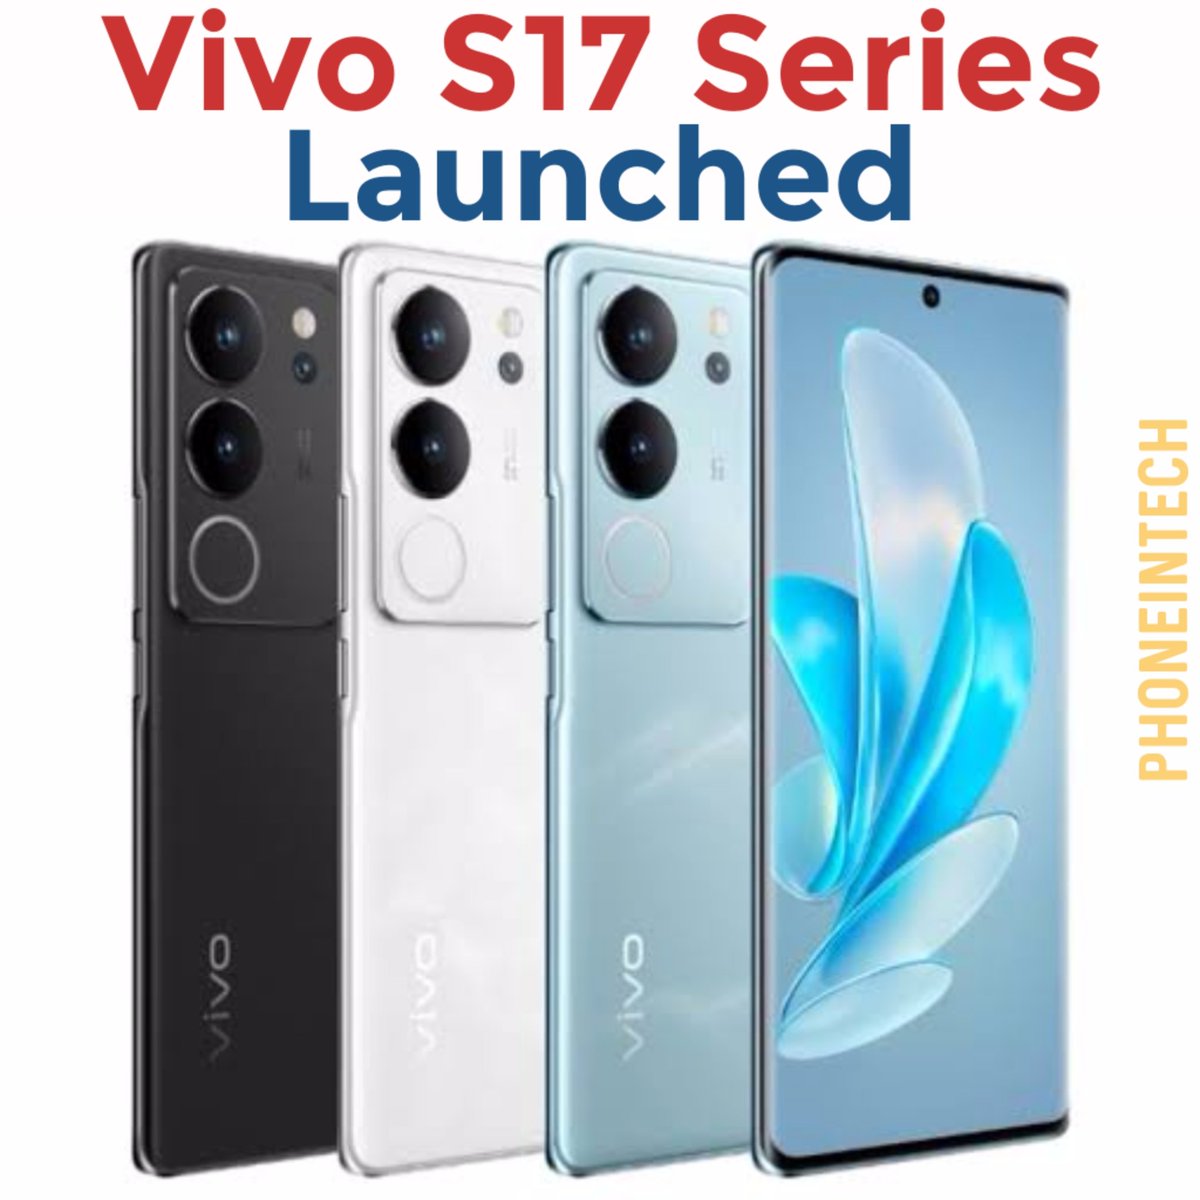 Vivo S17 Series launched. It features a 6.78 inch full HD+ AMOLED display. The battery is 4,600 mAh batteries with 80W fast charger. The pricing starts at CNY 2,499. 

#vivo #vivos17 #vivosmartphones #technews